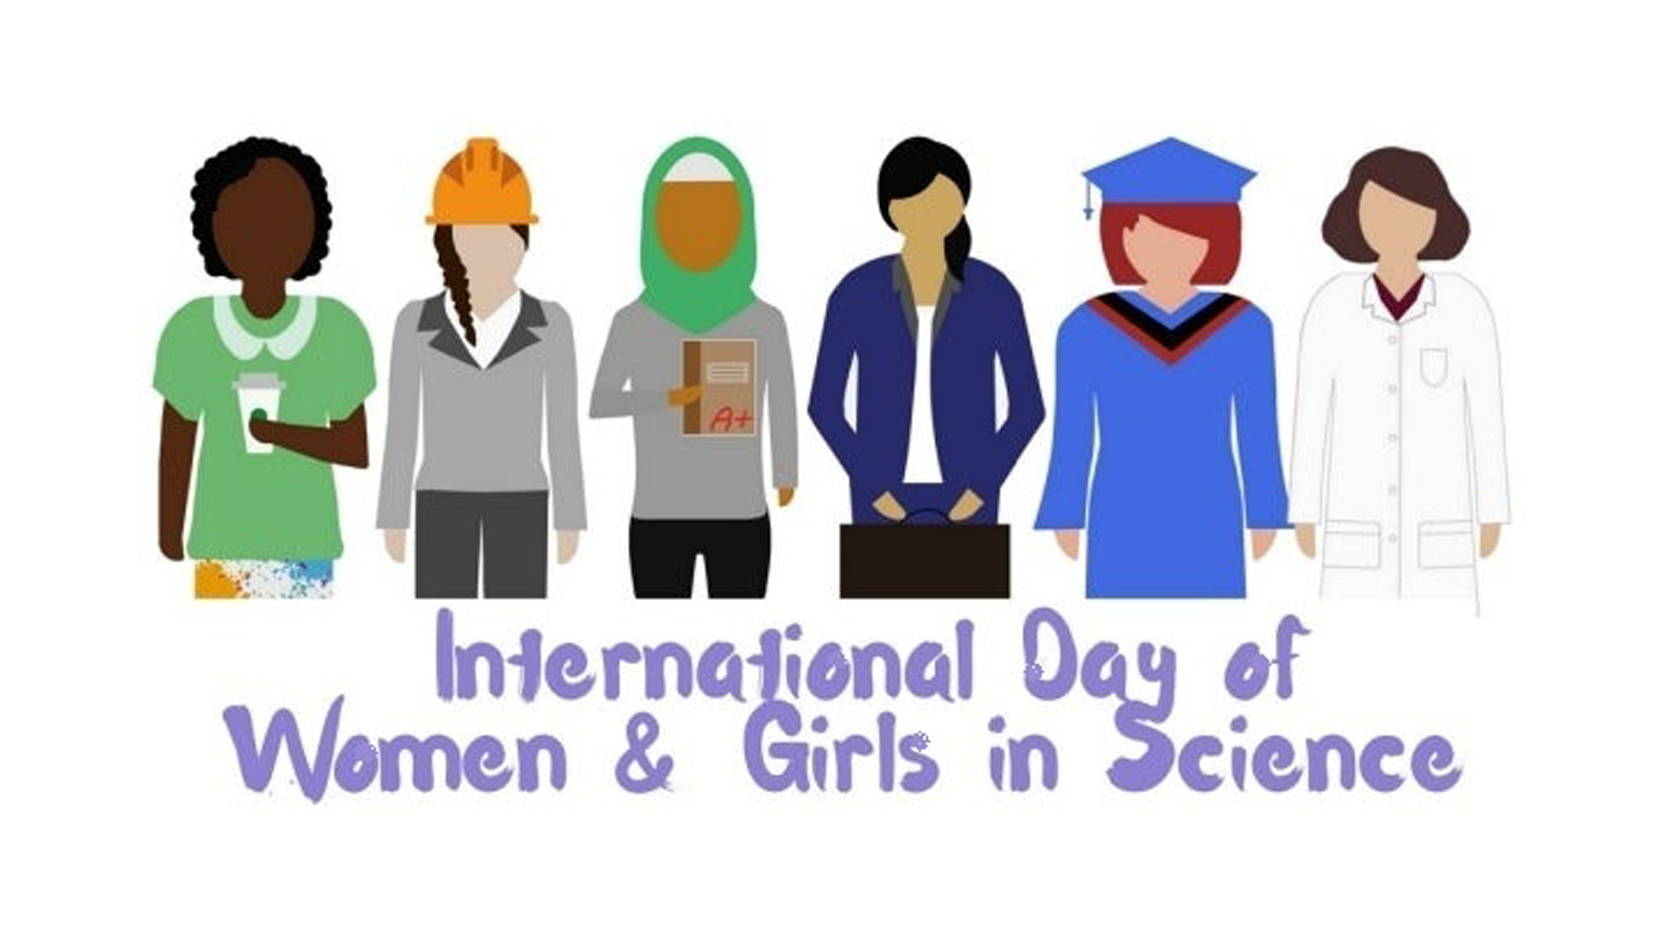 On International Day of Women and Girls in Science